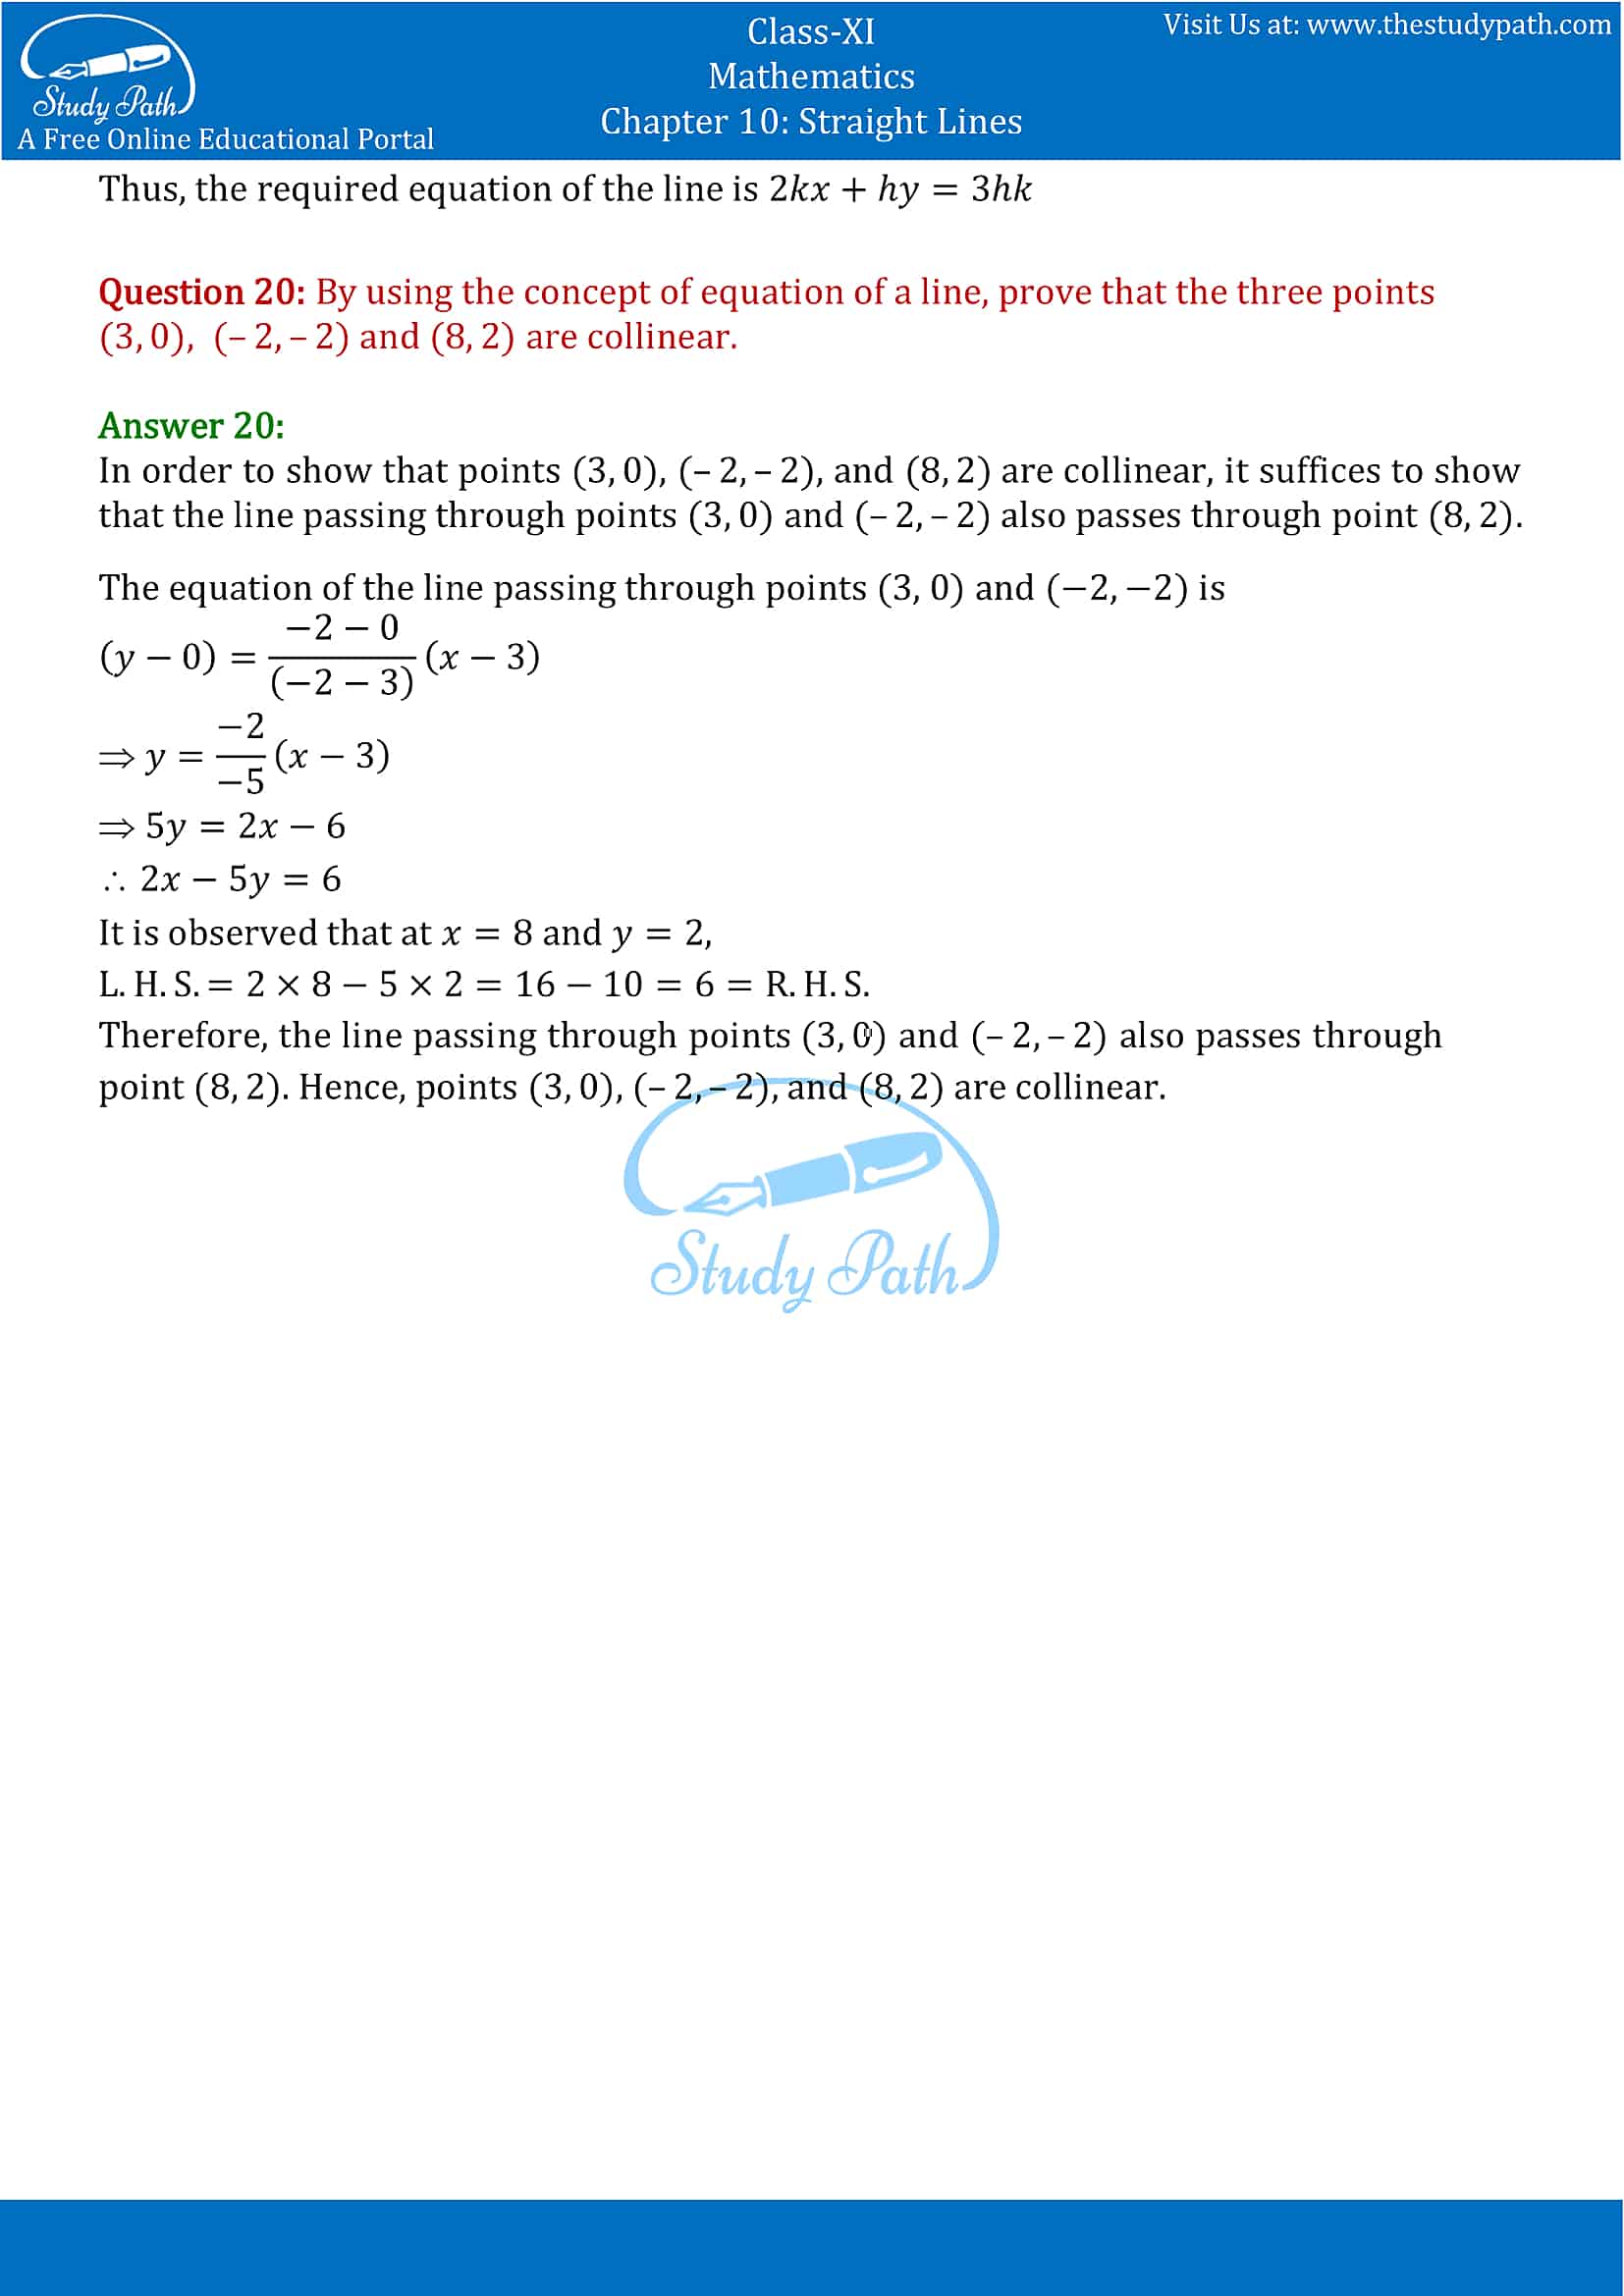 NCERT Solutions for Class 11 Maths chapter 10 Straight Lines Exercise 10.2 Part-11